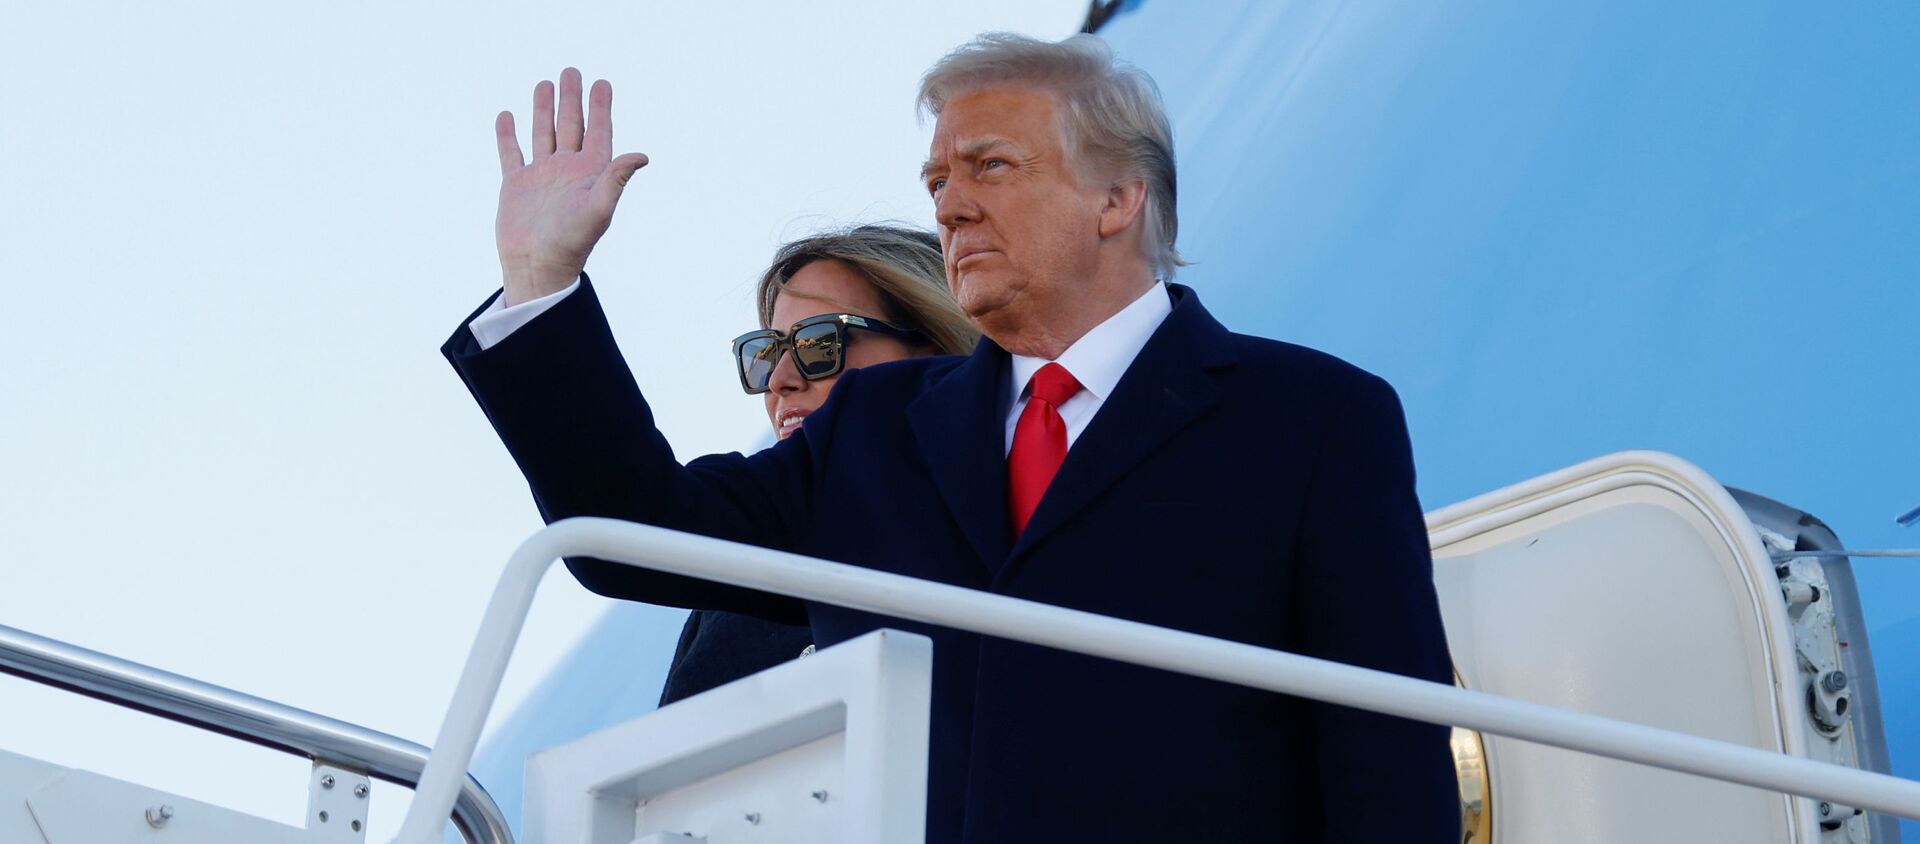 U.S. President Donald Trump, accompanied by first lady Melania Trump, waves as he boards Air Force One at Joint Base Andrews, Maryland, U.S., January 20, 2021. REUTERS/Carlos Barria - Sputnik International, 1920, 20.01.2021